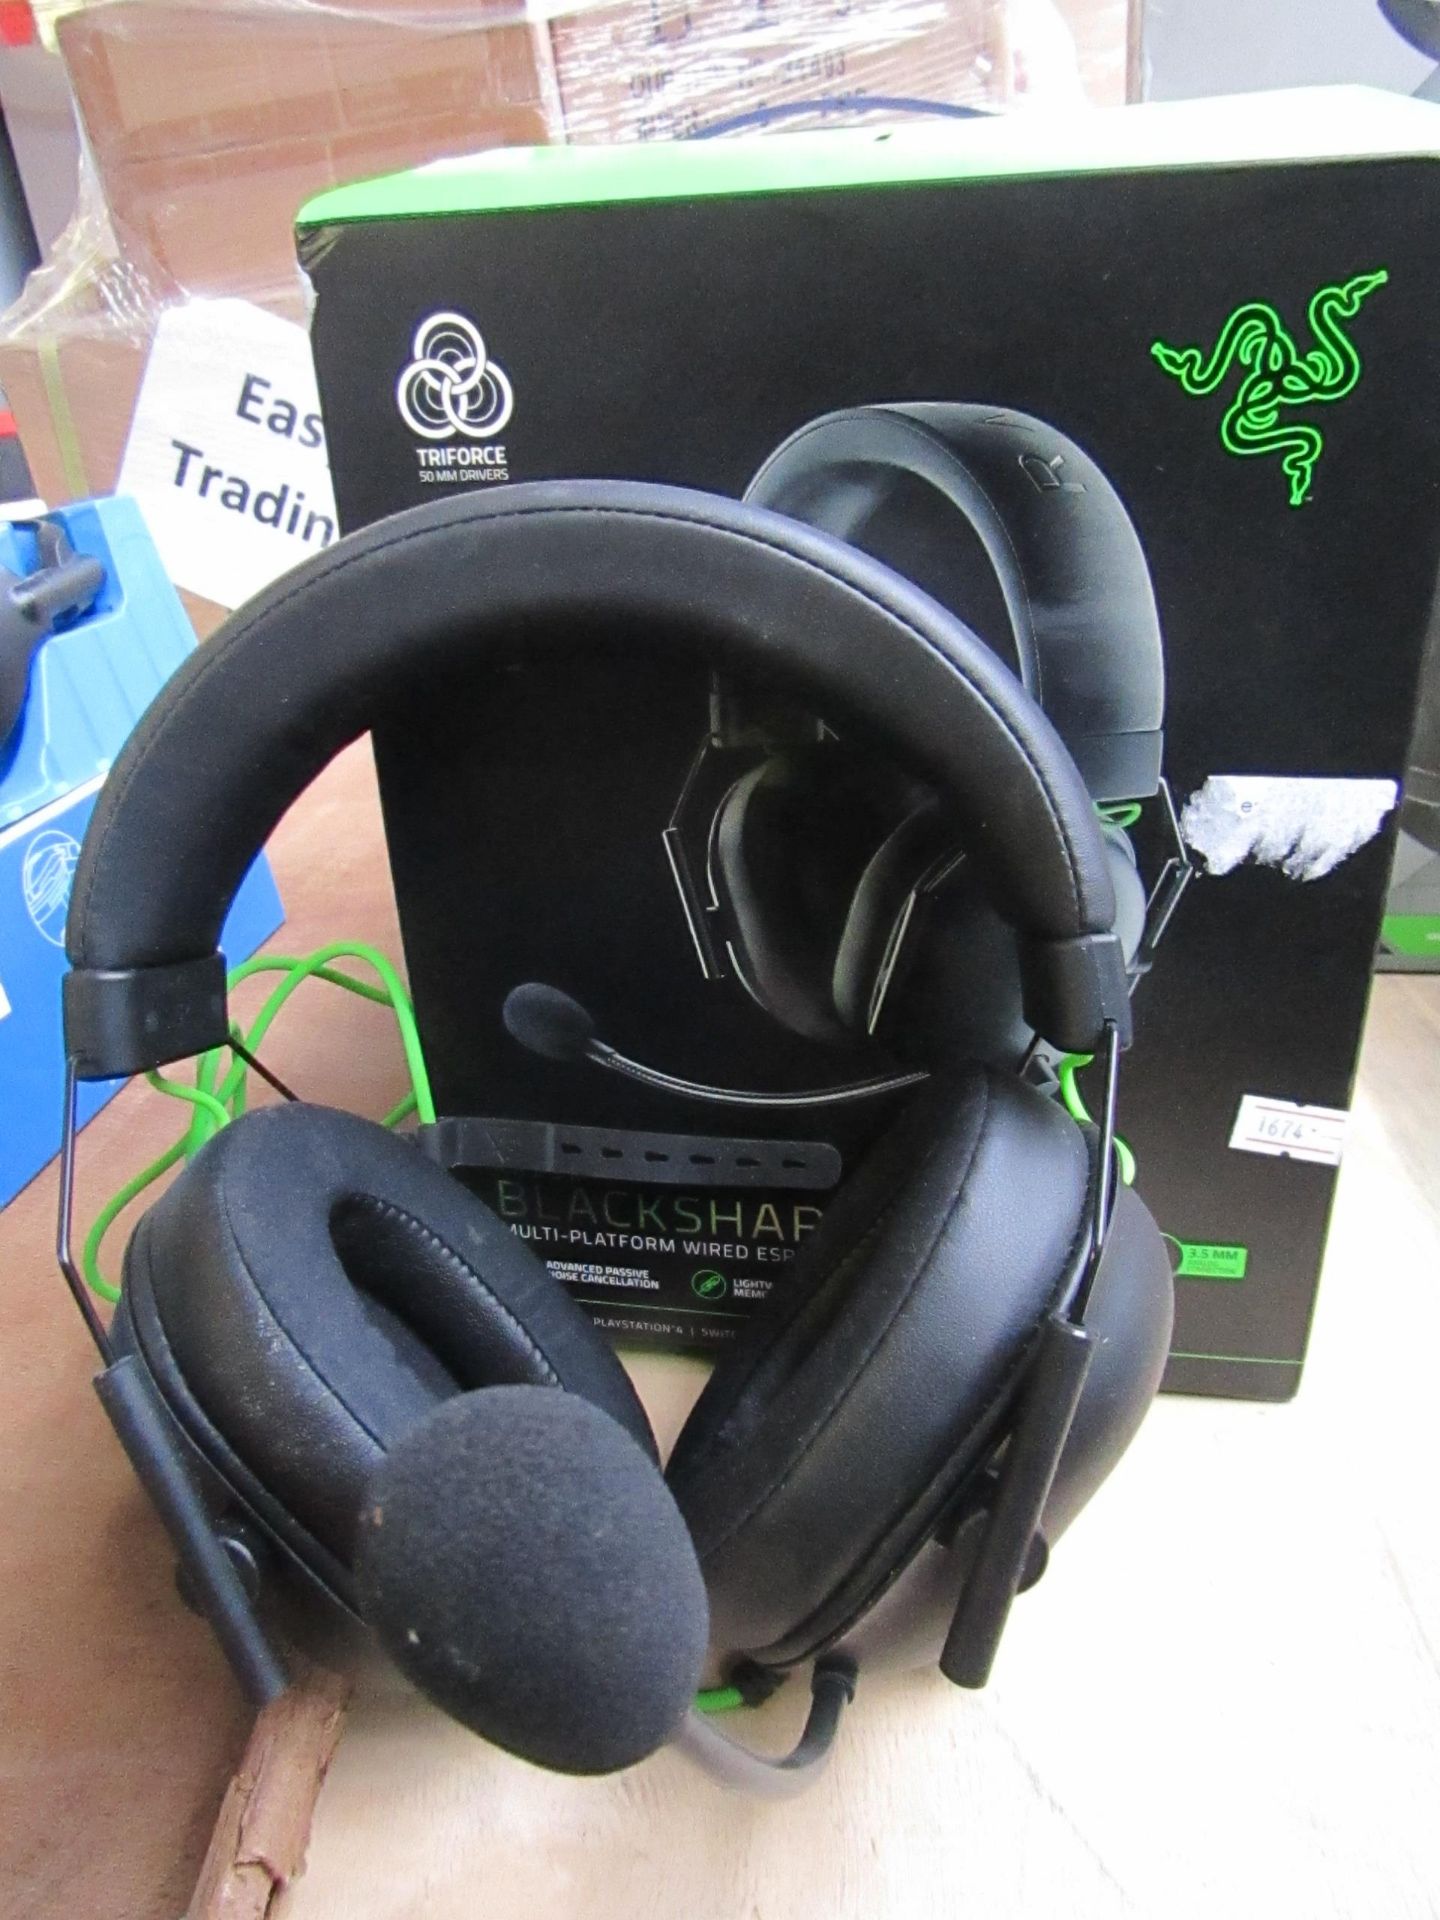 Razer gaming headphones, tested working for sound only and boxed.